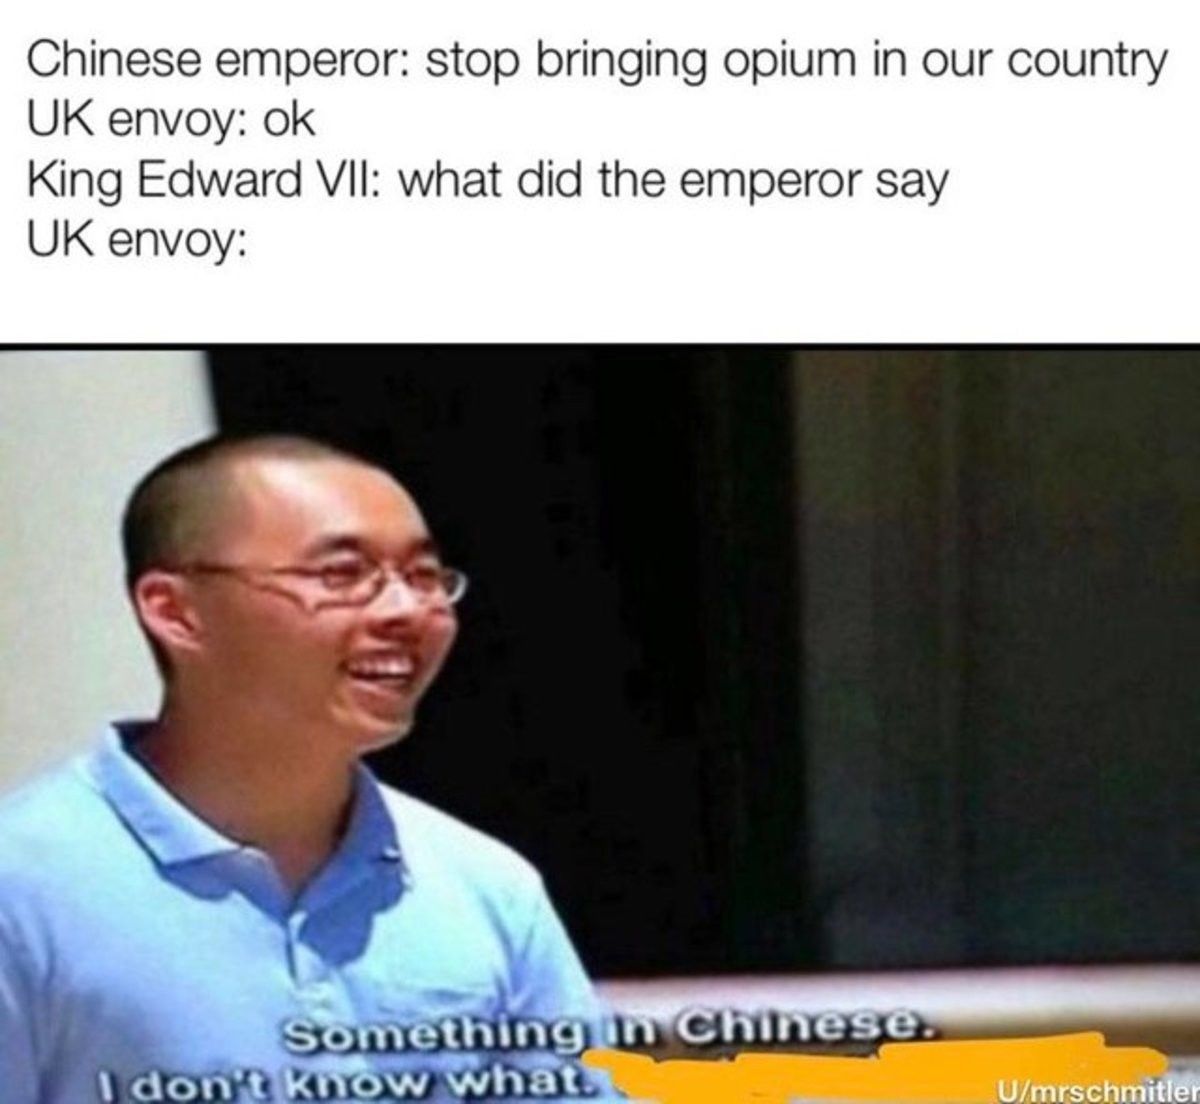 he said he wanted us to force them into opium addiction